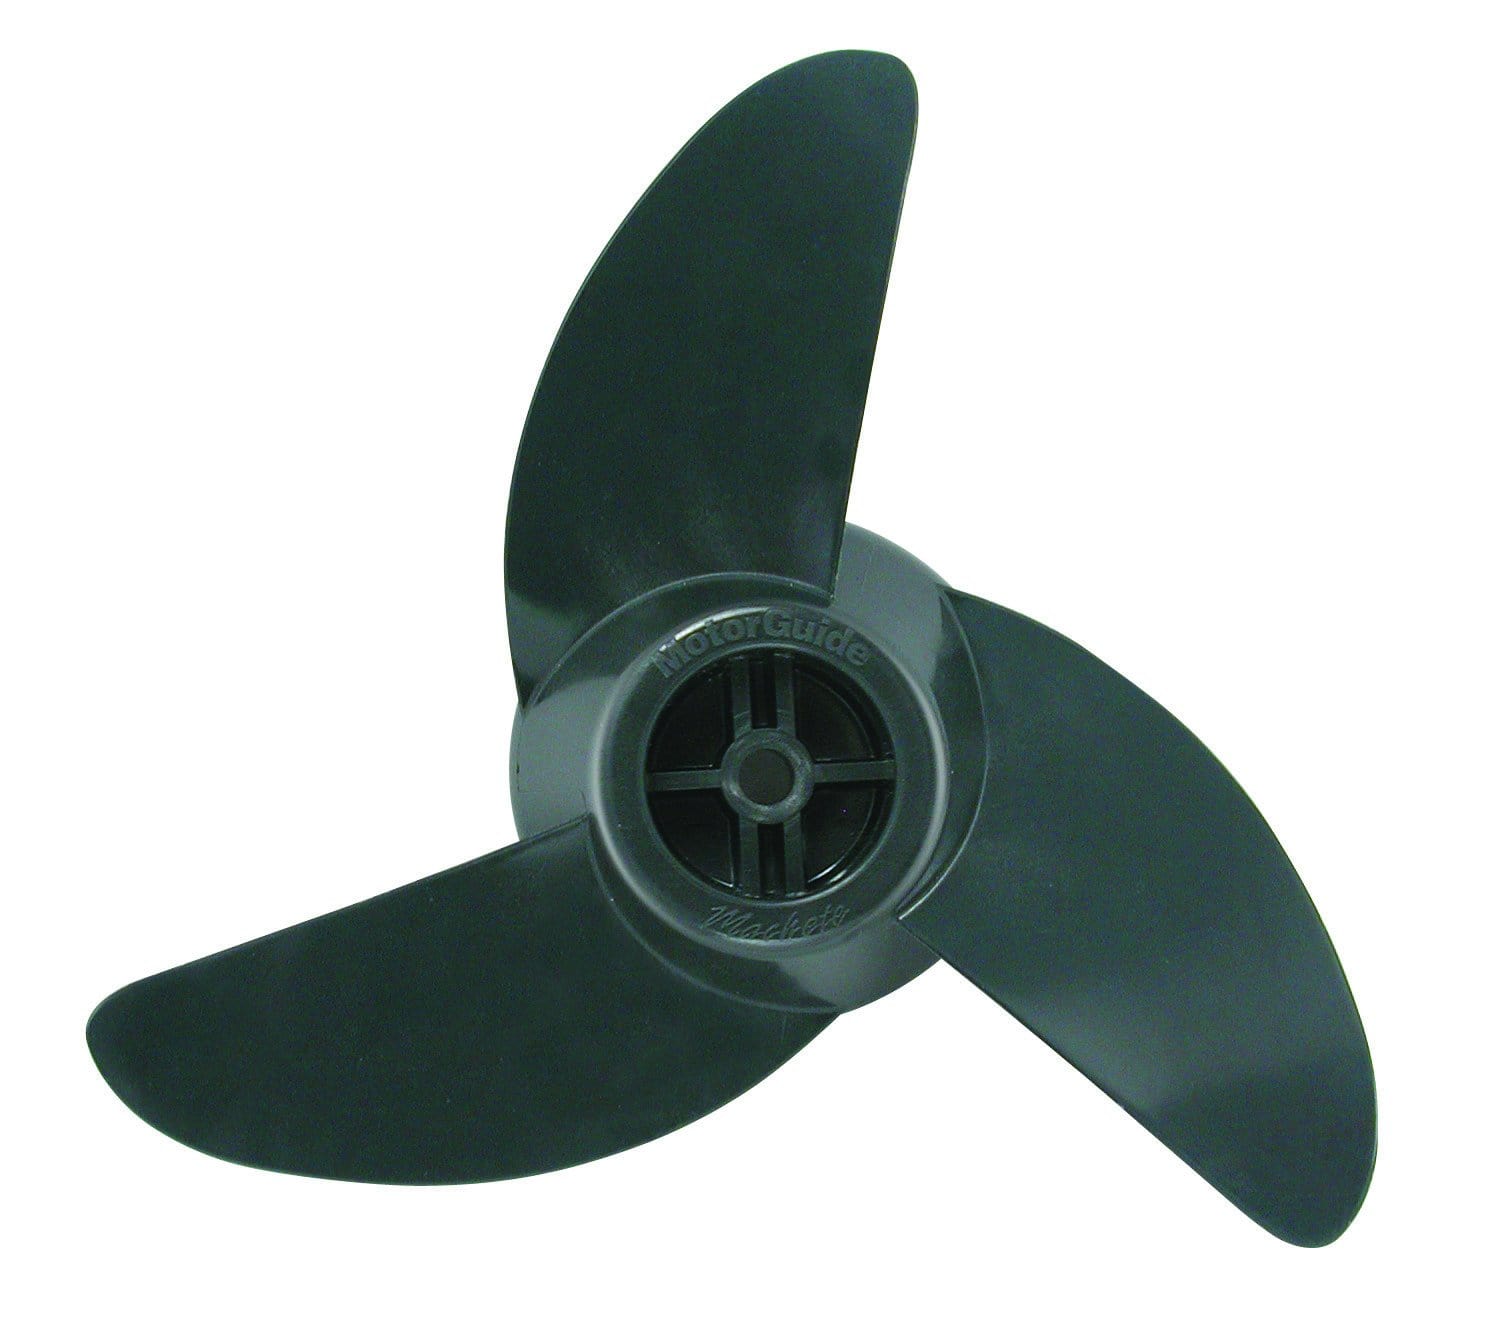 MotorGuide MGA089G Three Blade Machete III Tour Grey Glass Filled Propeller with 3.5" Hub